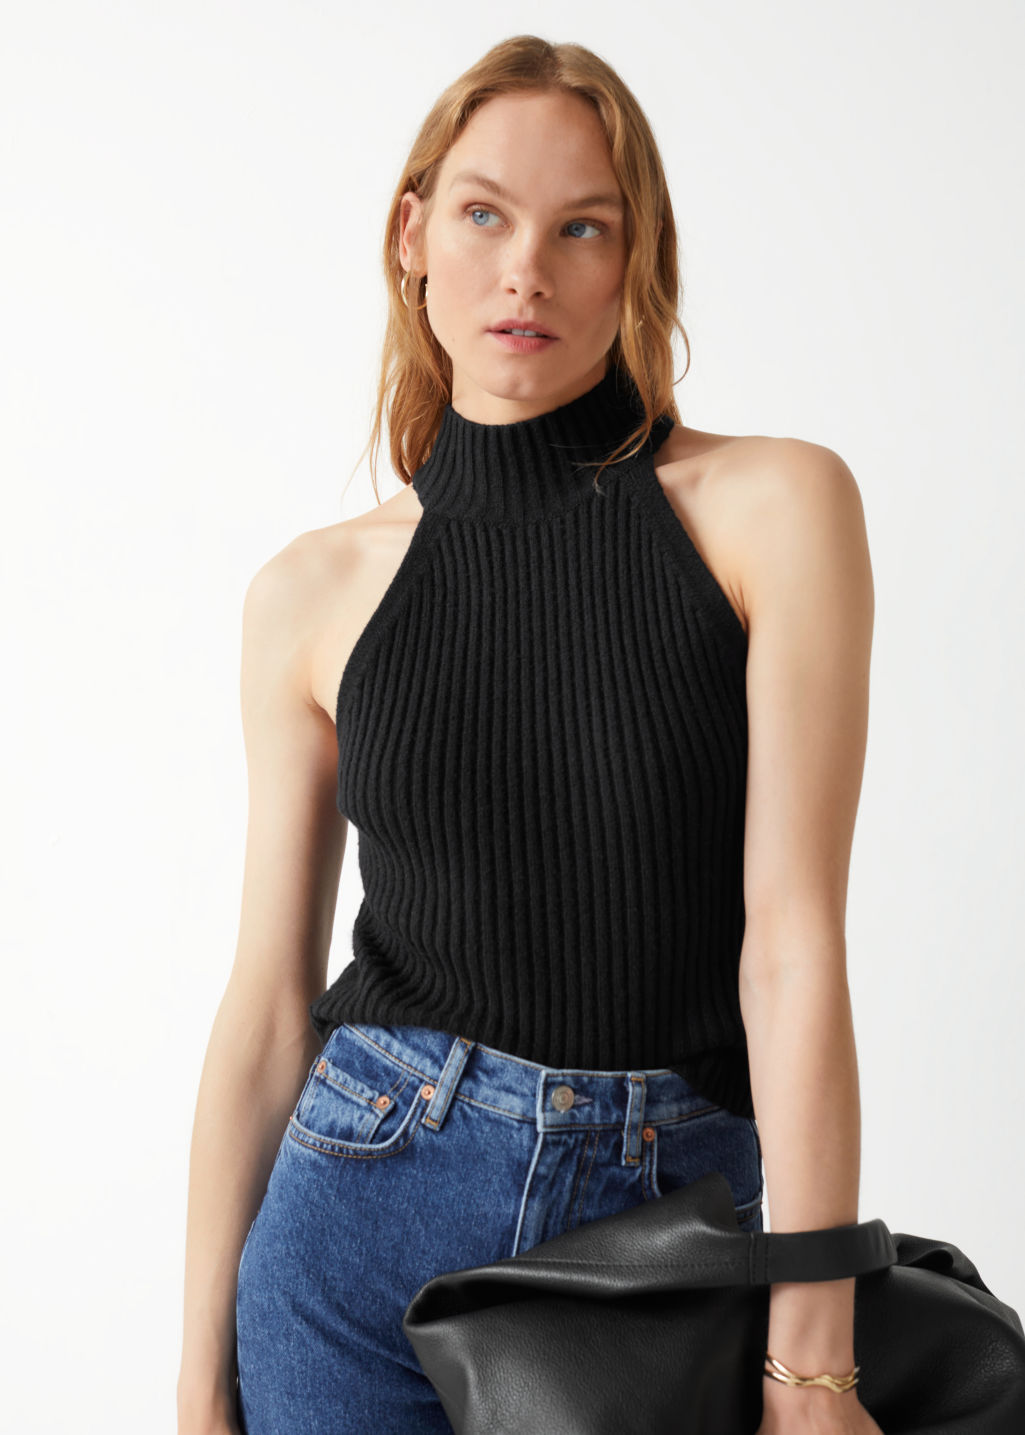 & Other Stories Sleeveless Turtleneck Knit Top